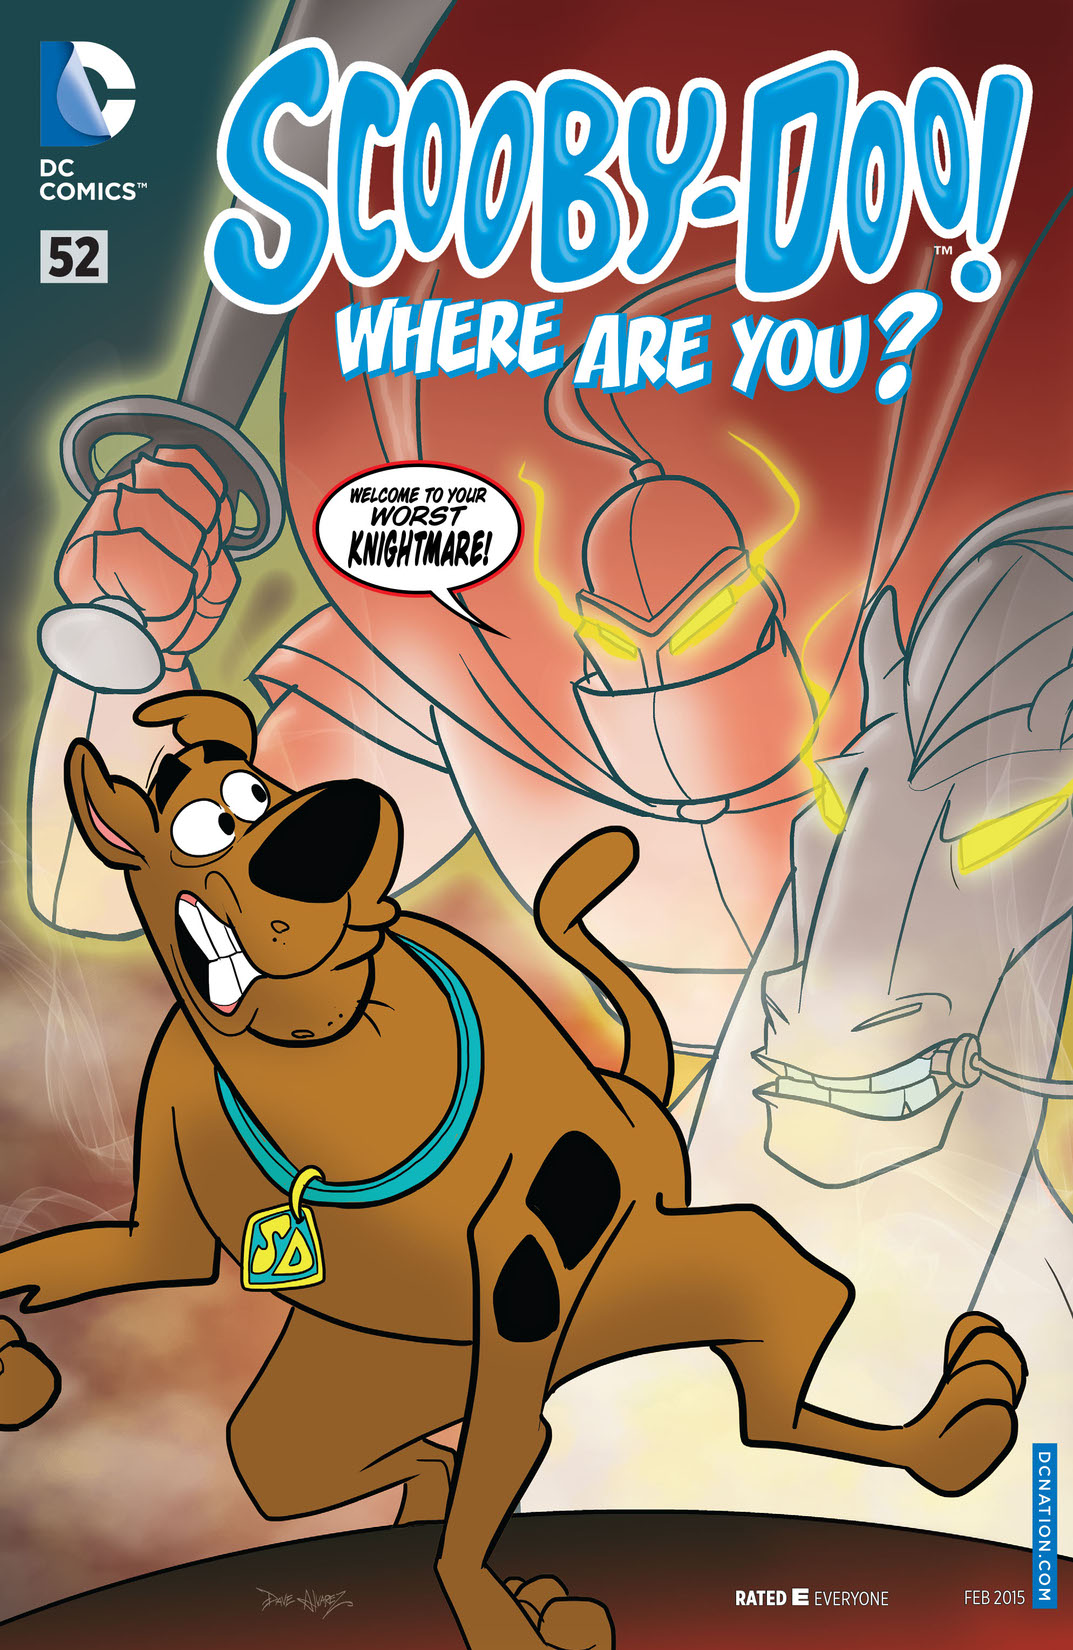 Scooby-Doo, Where Are You? #52 preview images